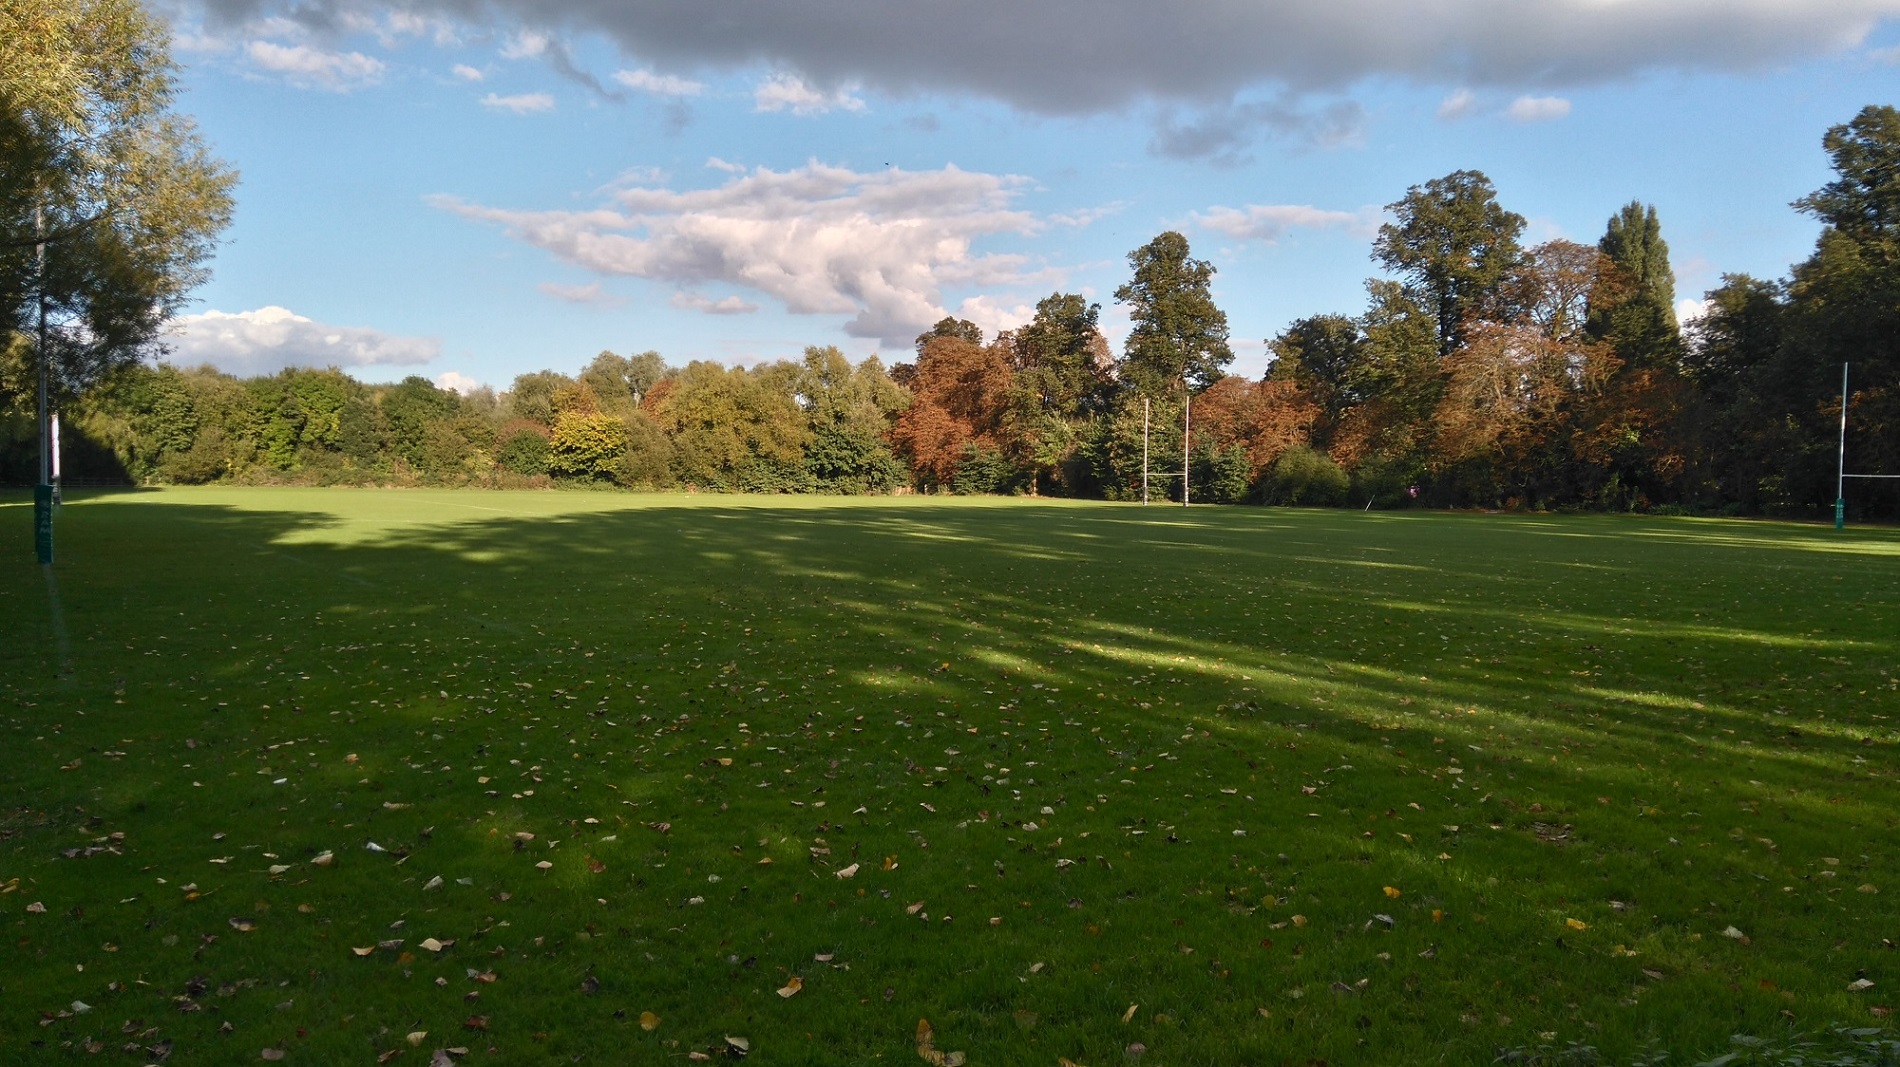 Rugby playing fields viewed on a sunny autumn day. Leaves are present across the vibrant grass, and in the background a hedge and trees are visible with copper and gold leaves.